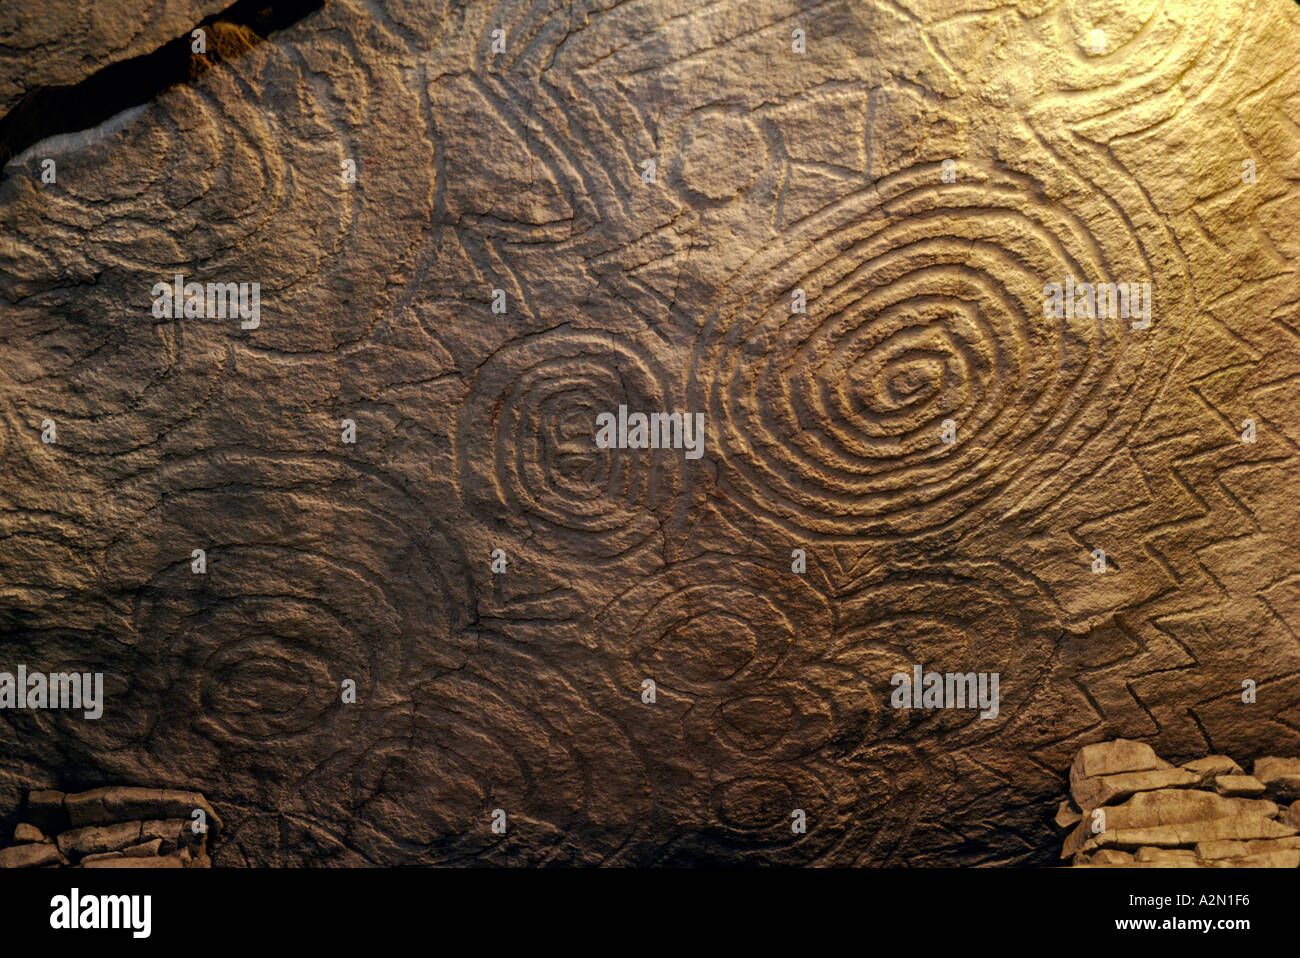 Newgrange prehistoric burial mound, Boyne Valley, Ireland. Carved spiral and chevron motifs on ceiling of the central chamber. Stock Photo